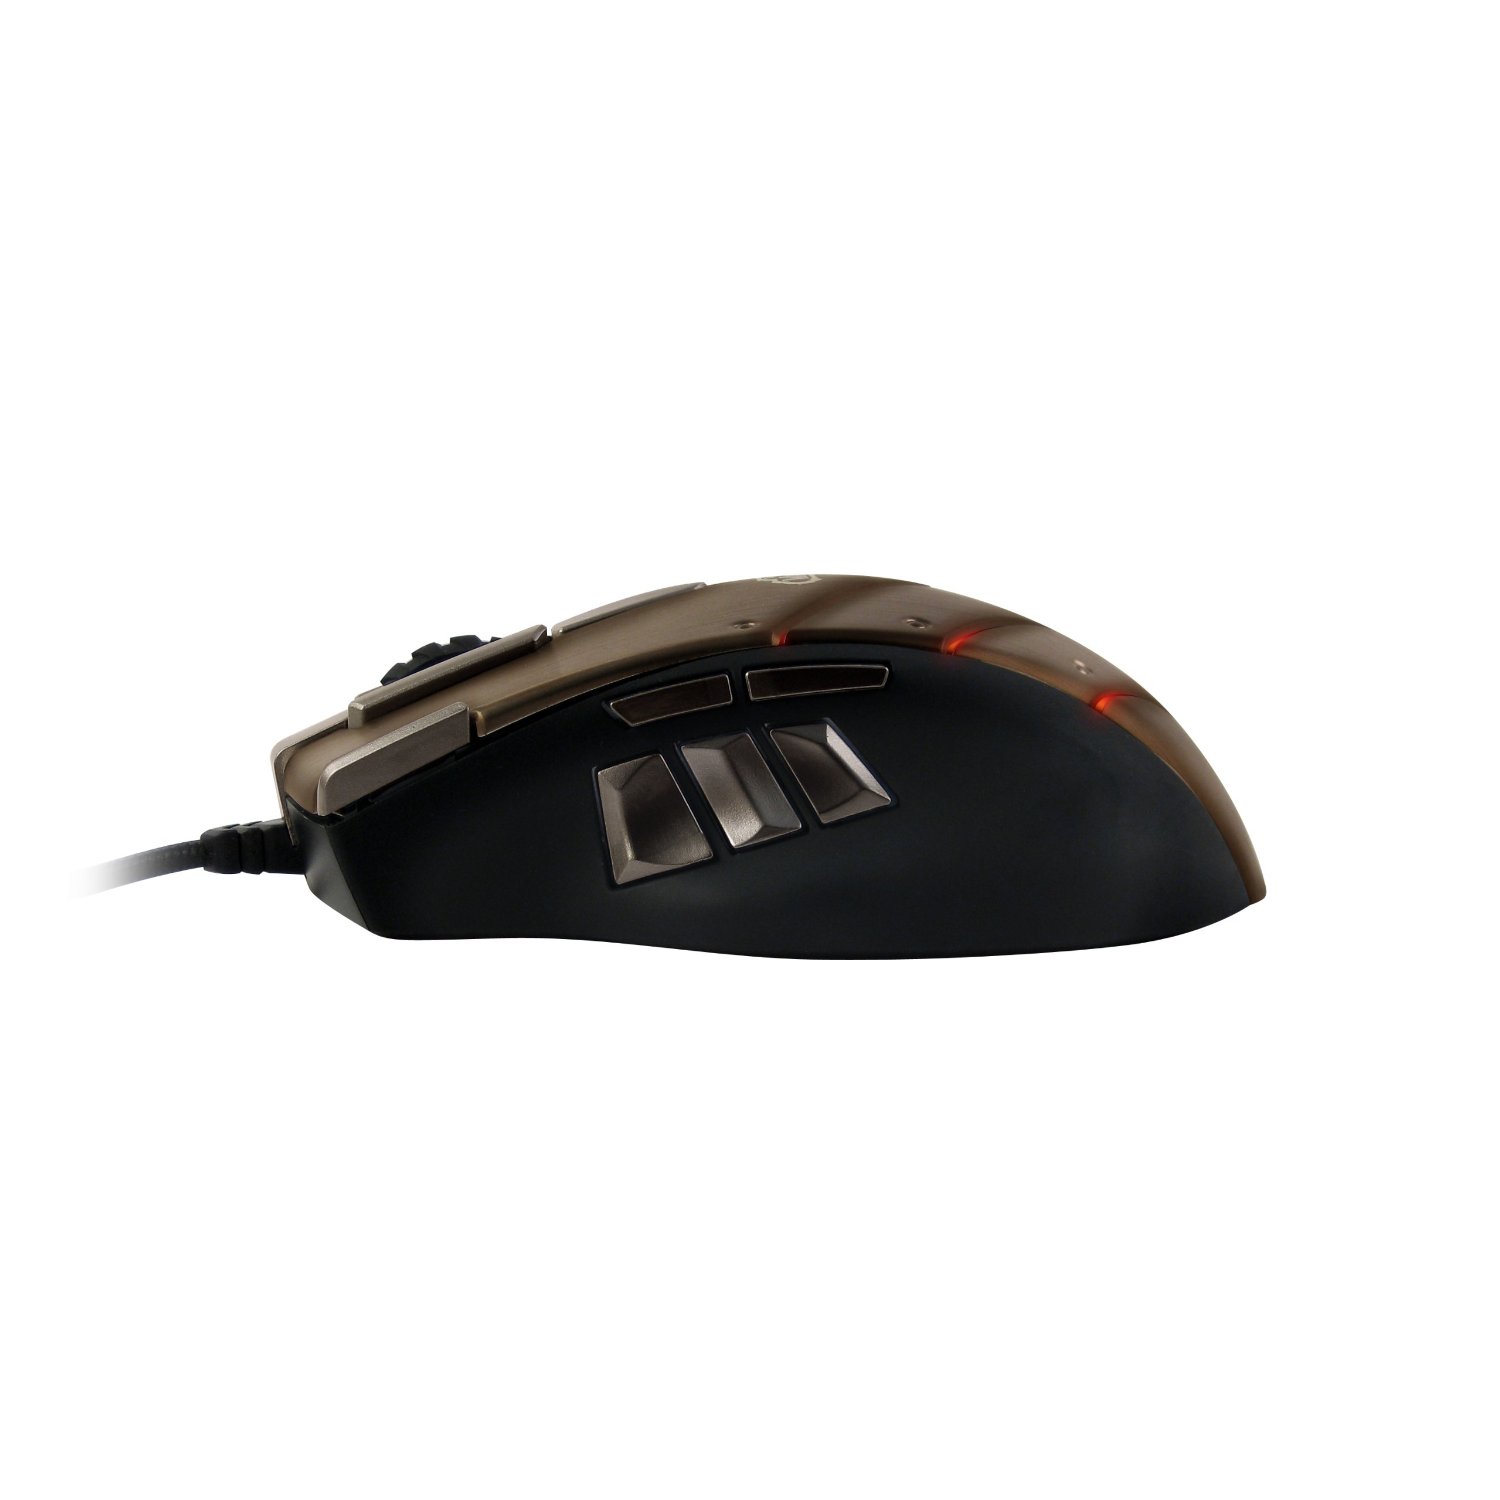 http://thetechjournal.com/wp-content/uploads/images/1202/1329465639-steelseries-world-of-warcraft-cataclysm-mmo-gaming-mouse-4.jpg